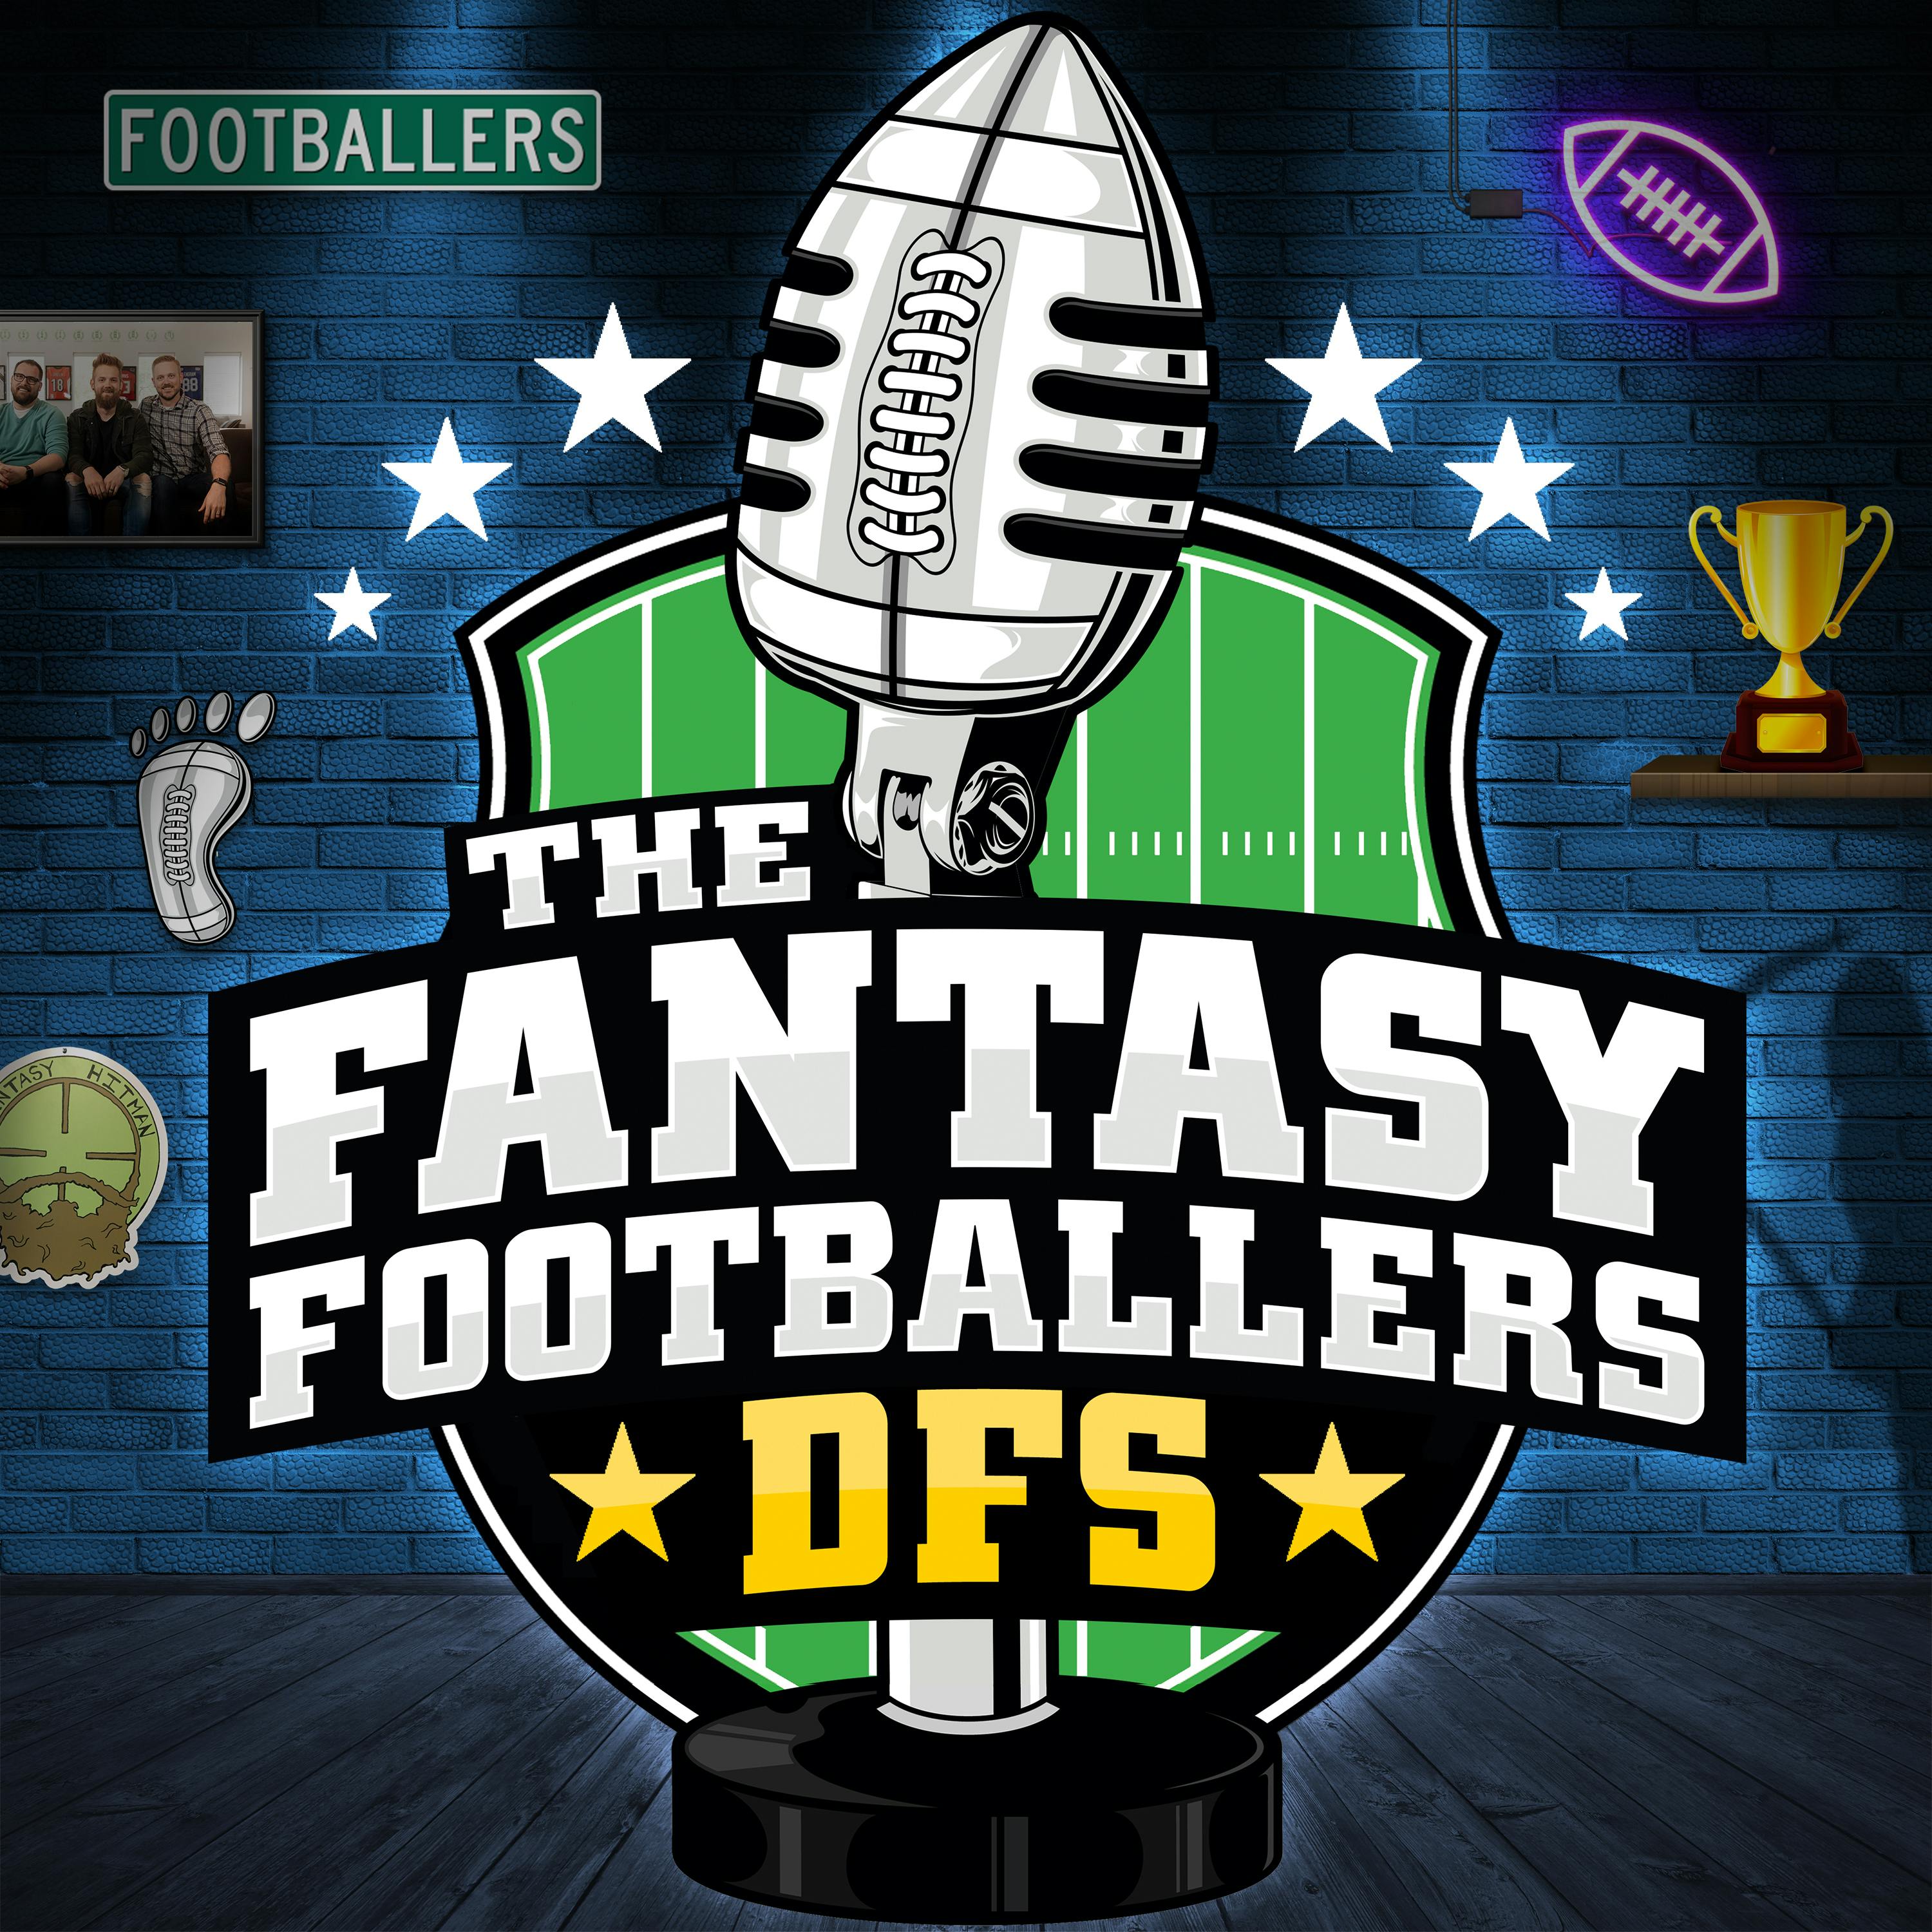 DFS Roster Construction + How to Use Roster Percentages - Fantasy Football DFS